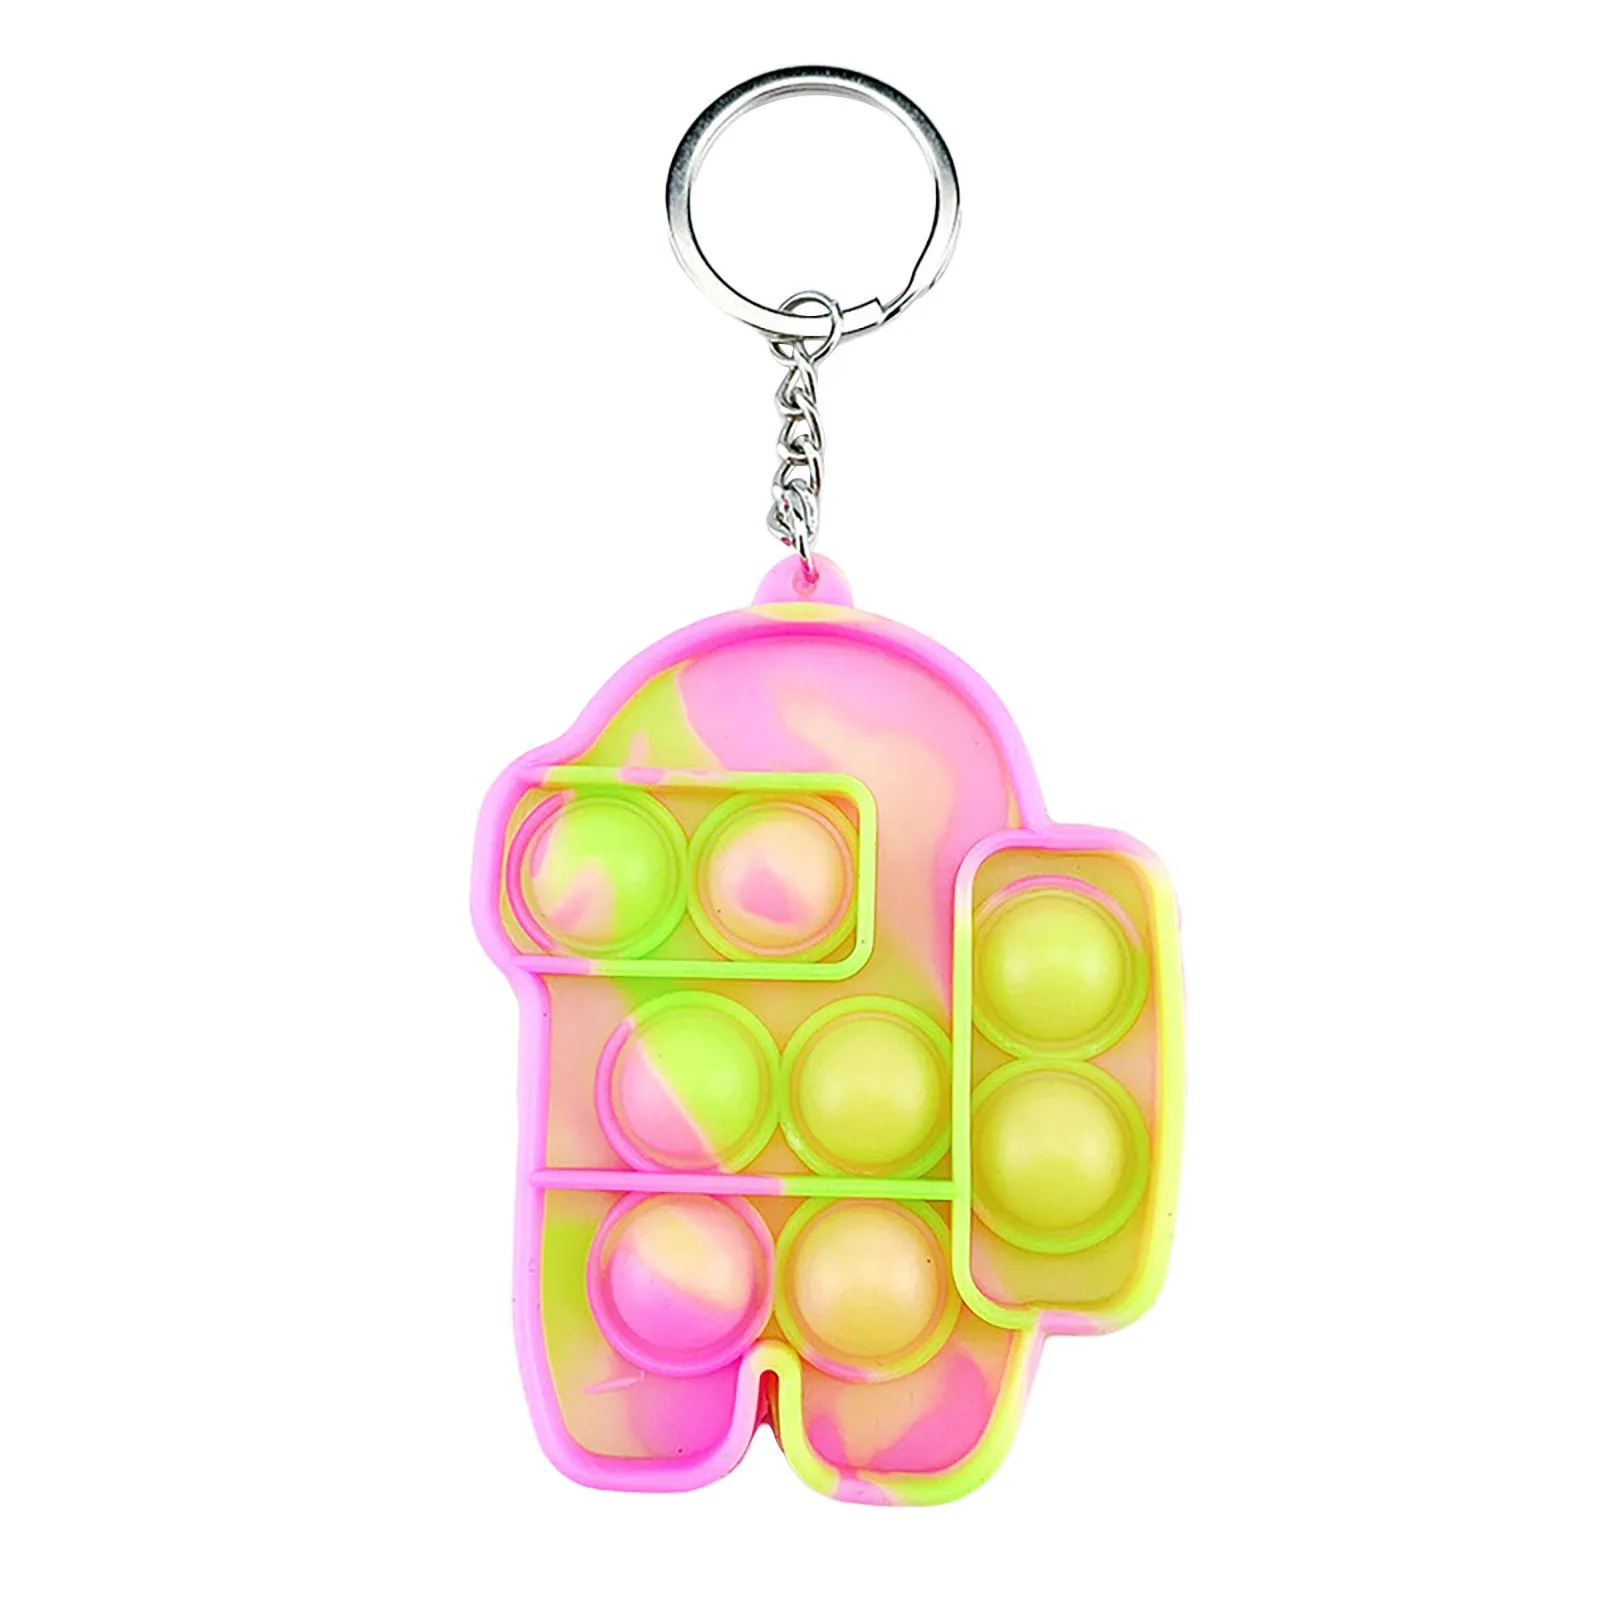 Mini Pops Simple Dimple Keychain Its Push Bubble Anxiety Sensory Fidget Toy Anti Stress Relief For Autism Adults Key Chain Toys nedo stress ball